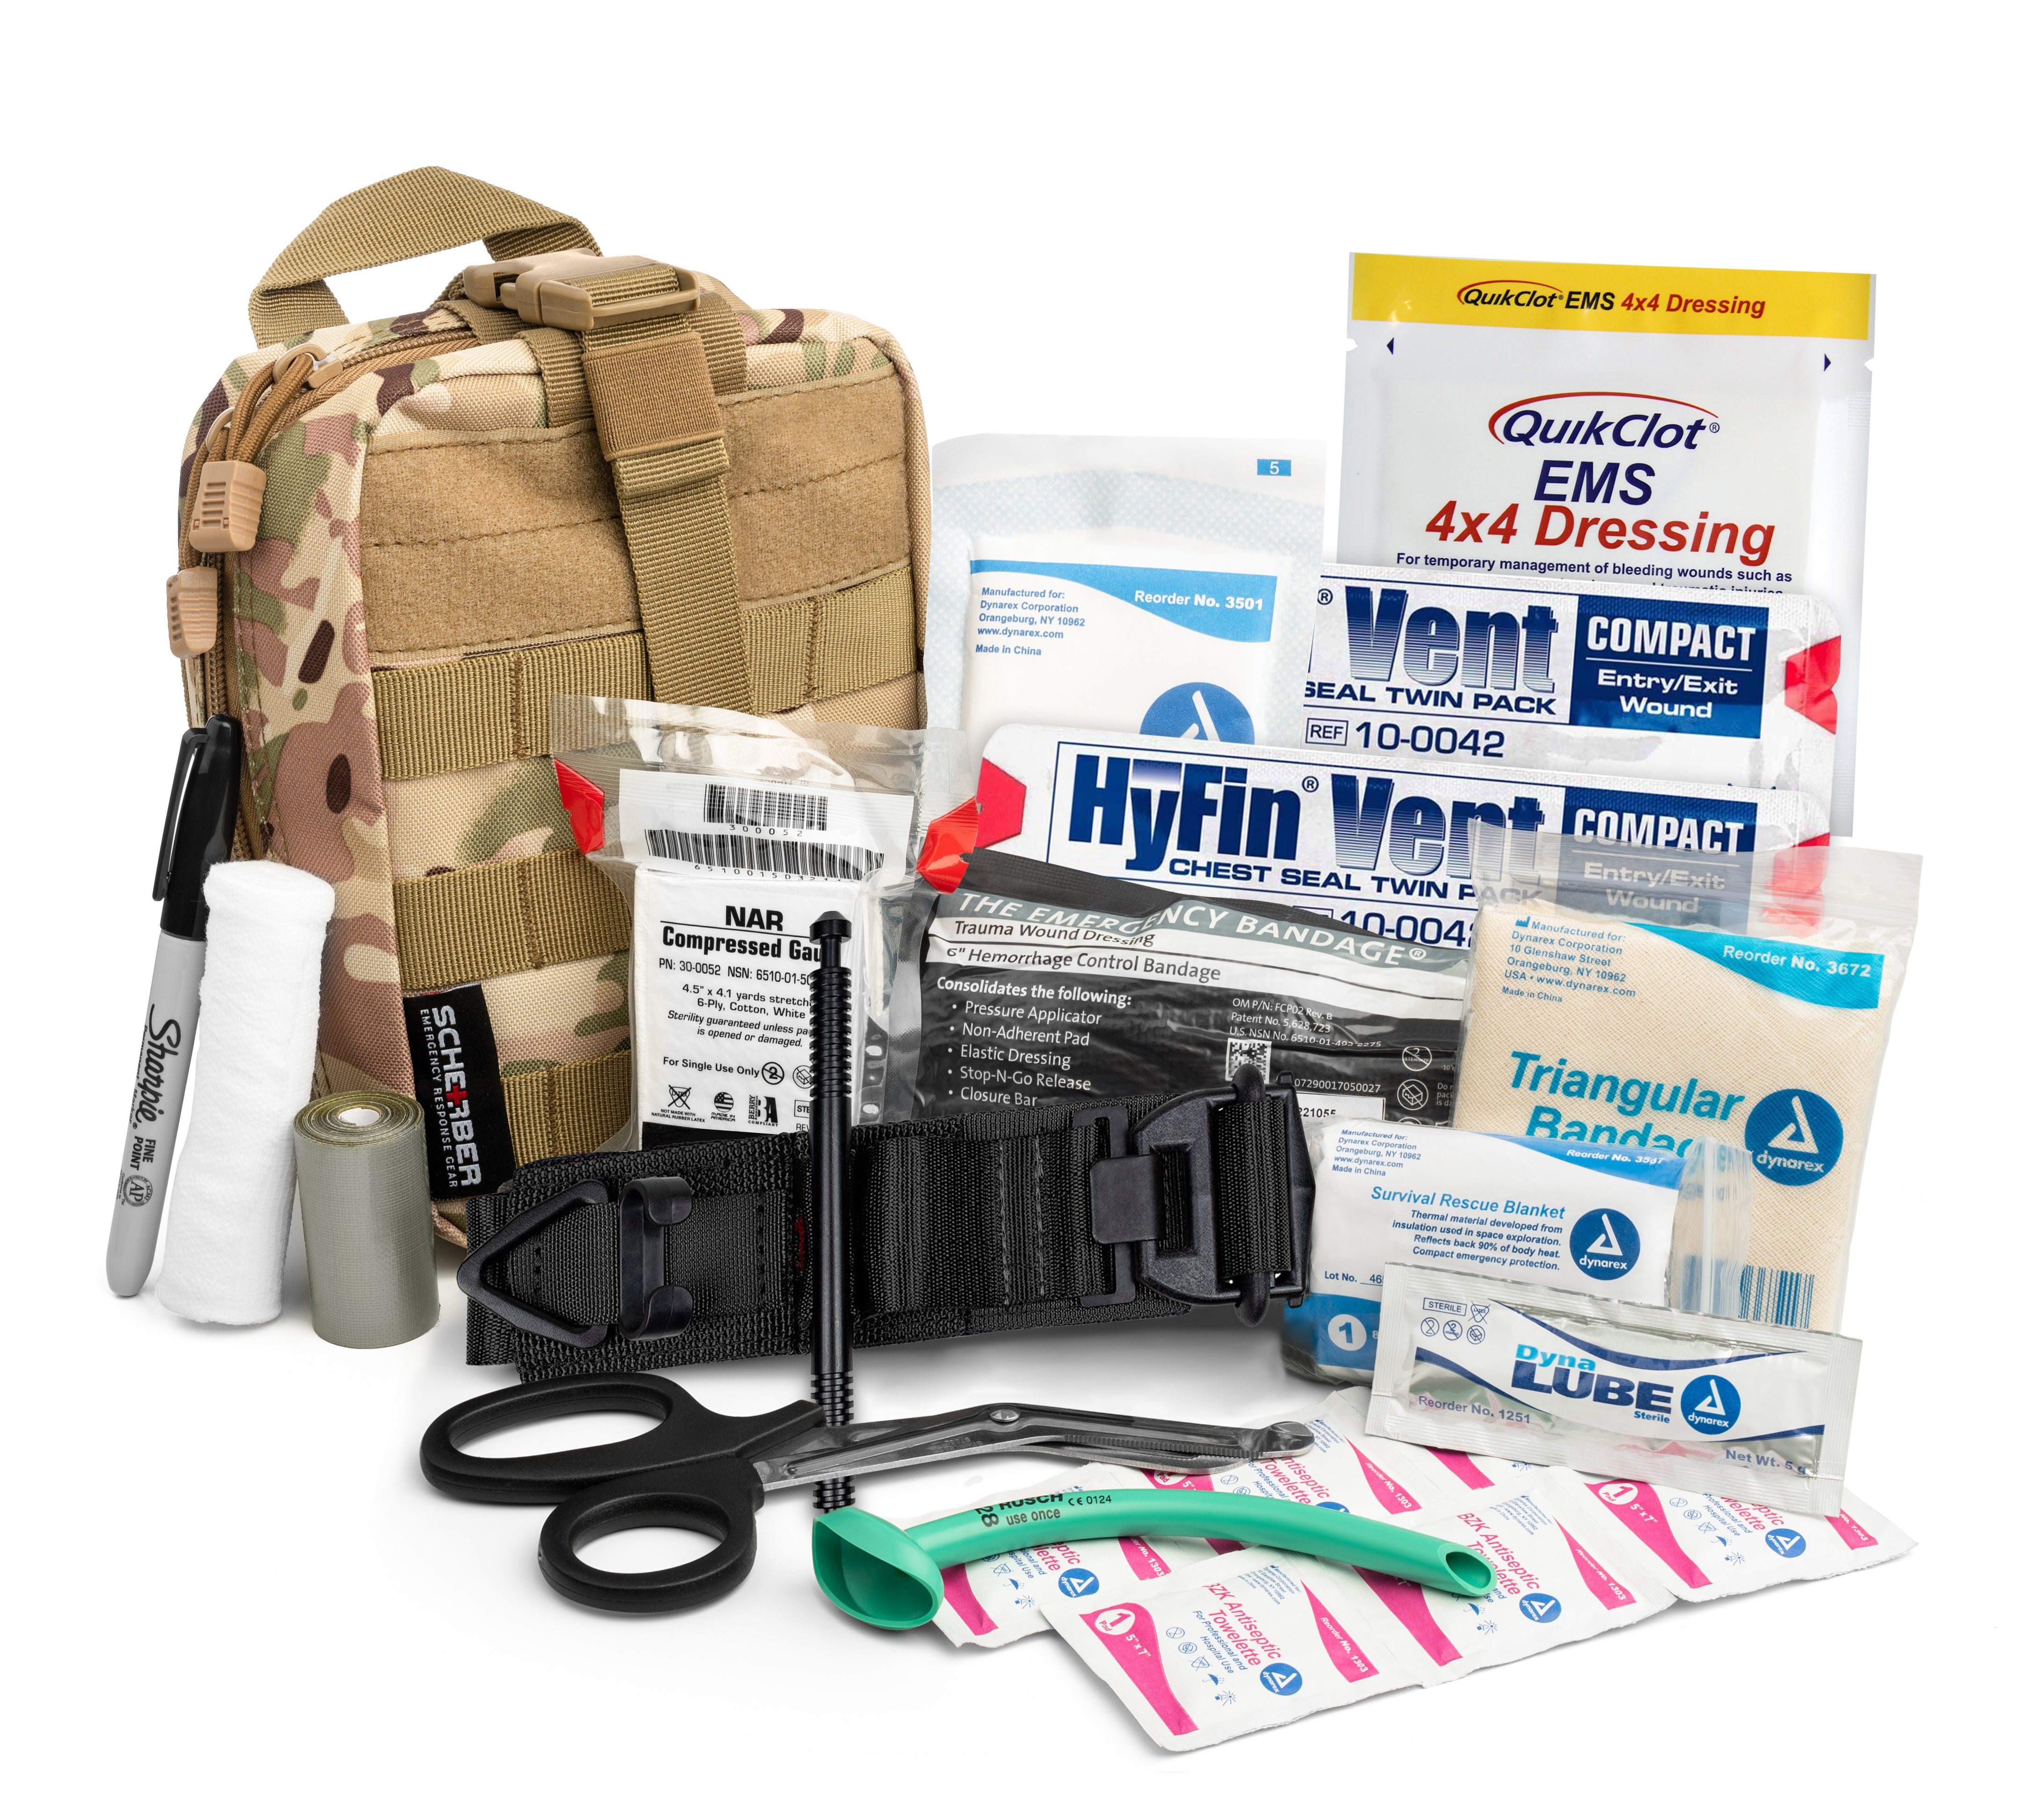 Emergency Survival Kit 50 Pc Survival Gear Tactical IFAK First Aid Kit